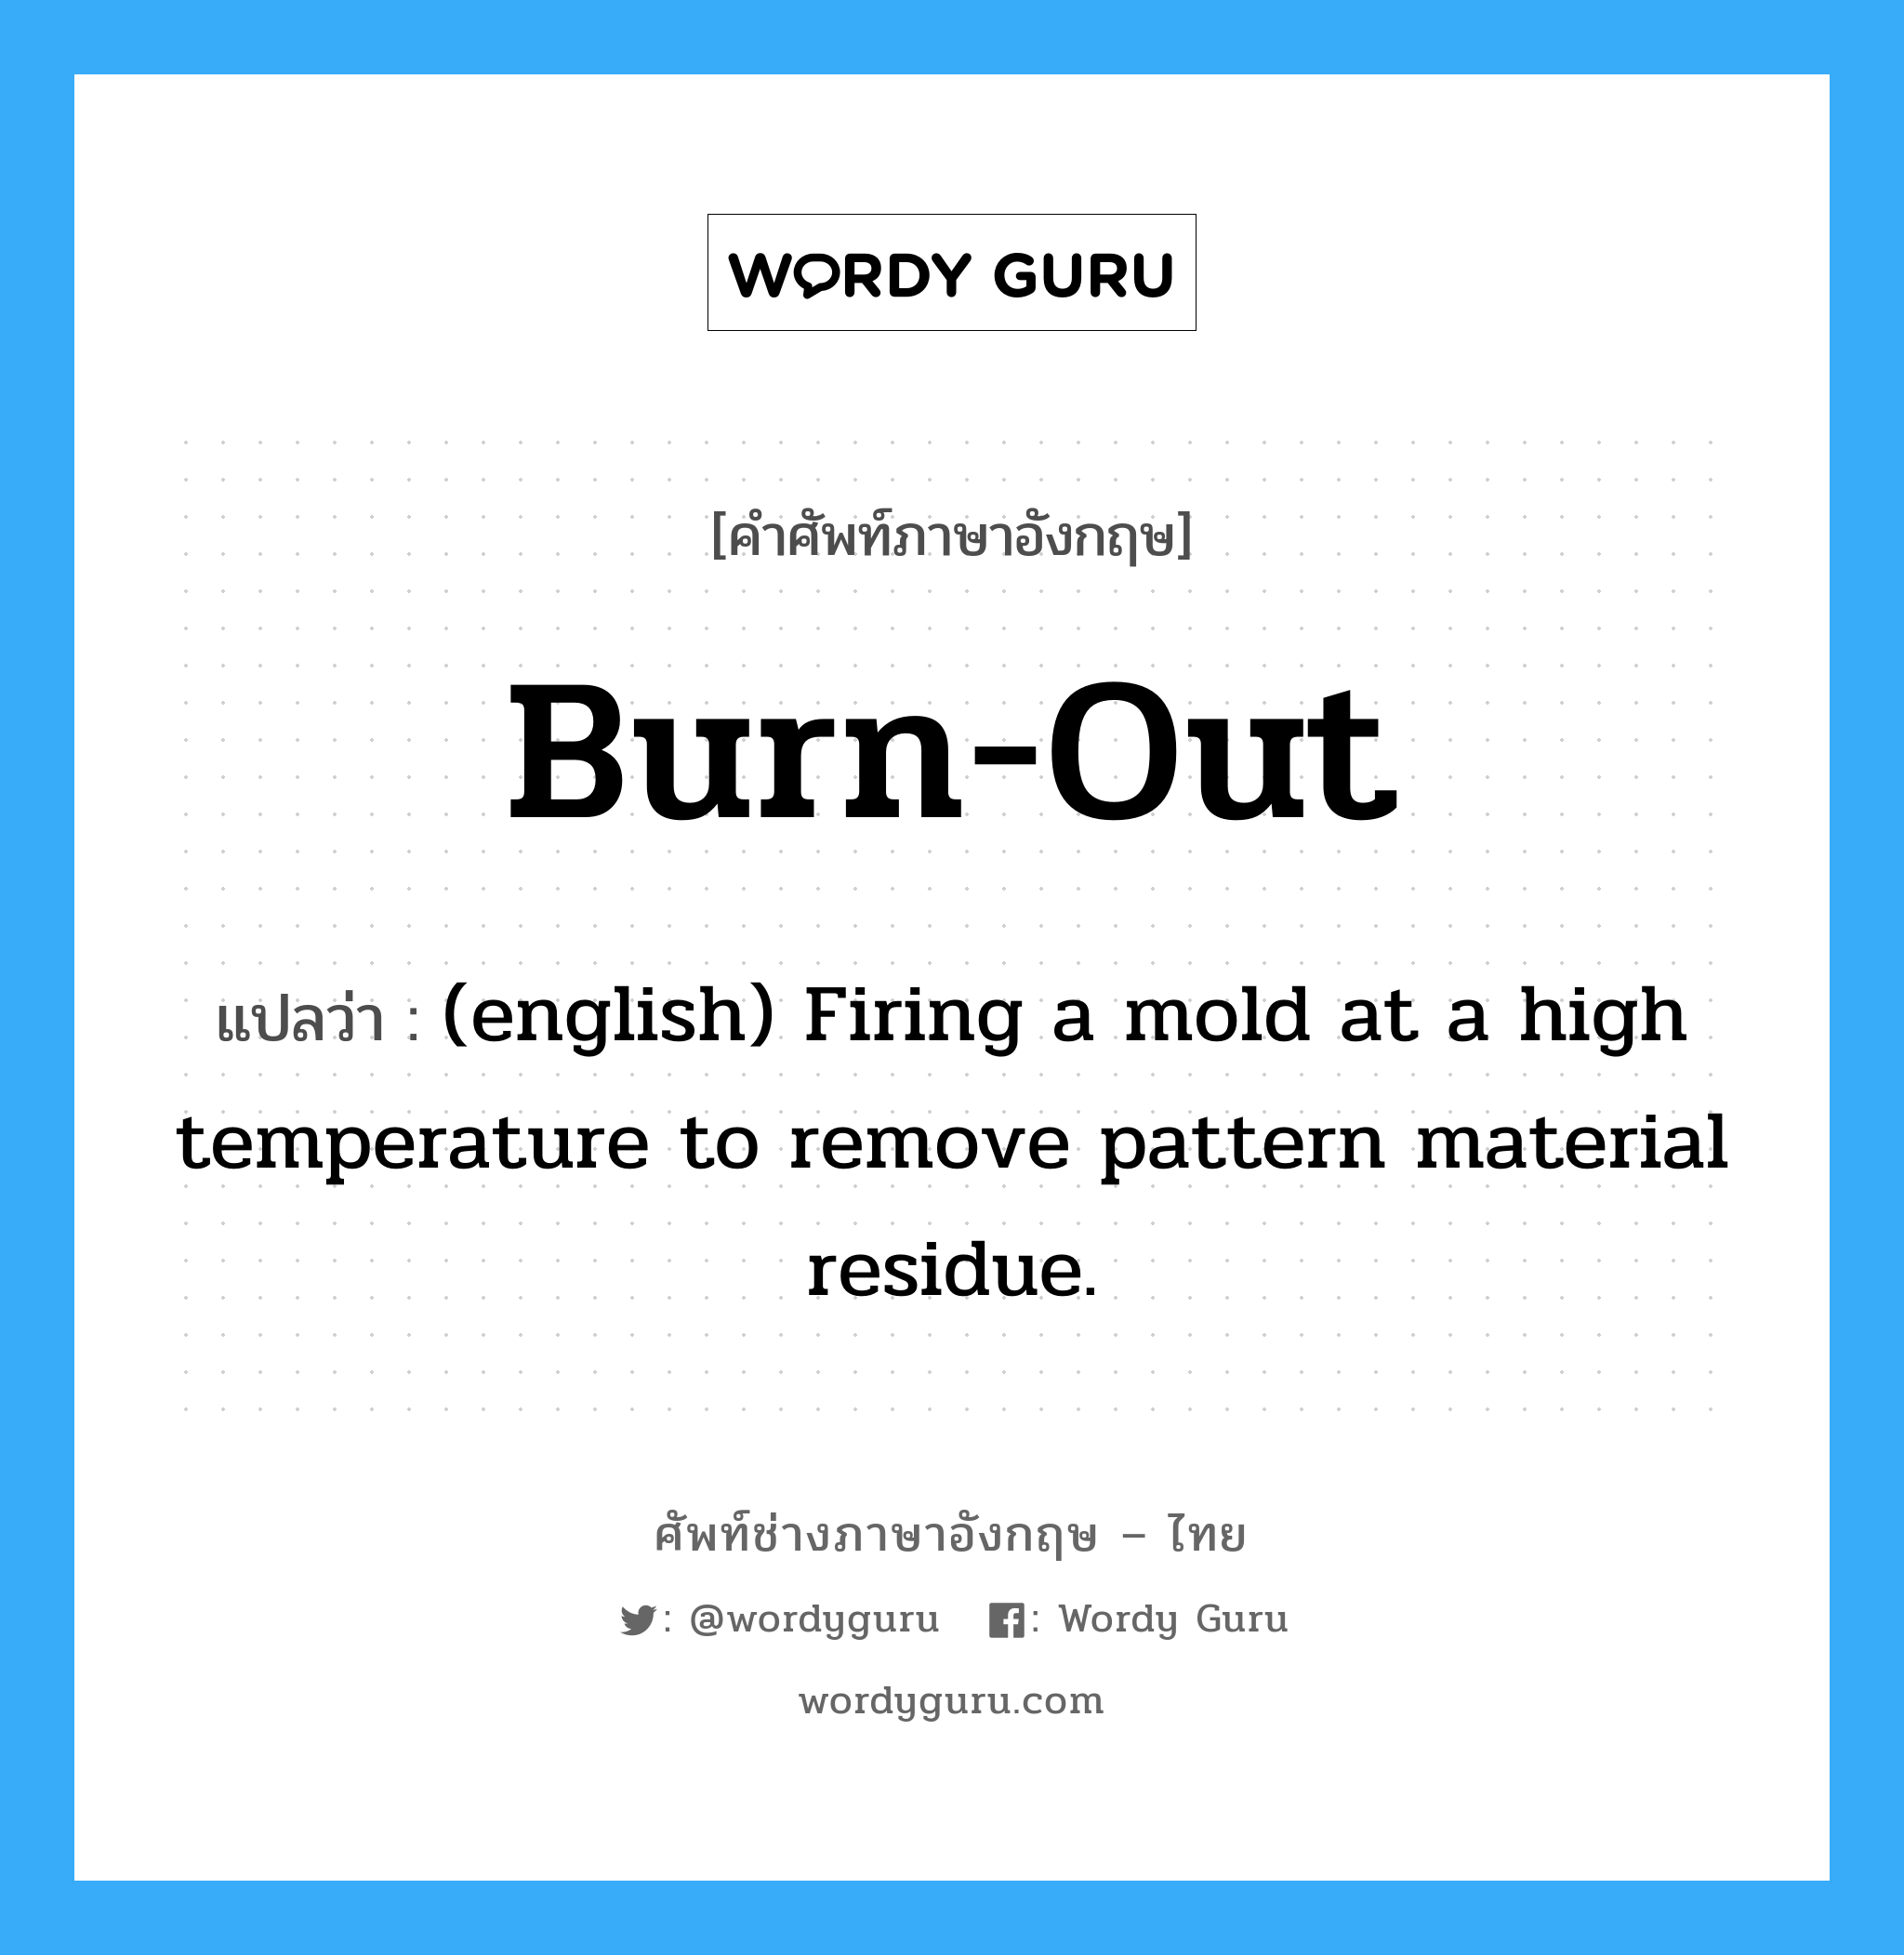 Burn-Out แปลว่า?, คำศัพท์ช่างภาษาอังกฤษ - ไทย Burn-Out คำศัพท์ภาษาอังกฤษ Burn-Out แปลว่า (english) Firing a mold at a high temperature to remove pattern material residue.